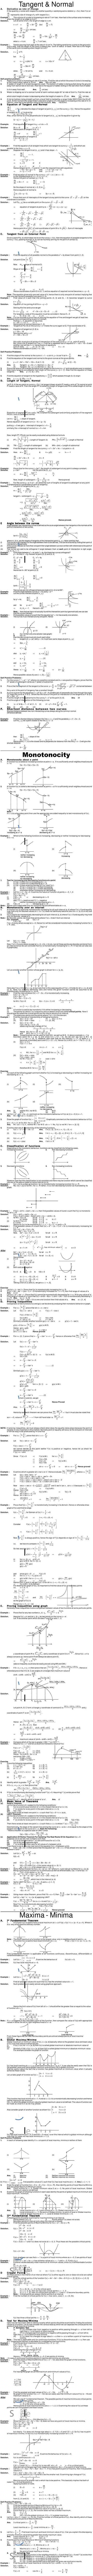 Maths Study Material - Chapter 13